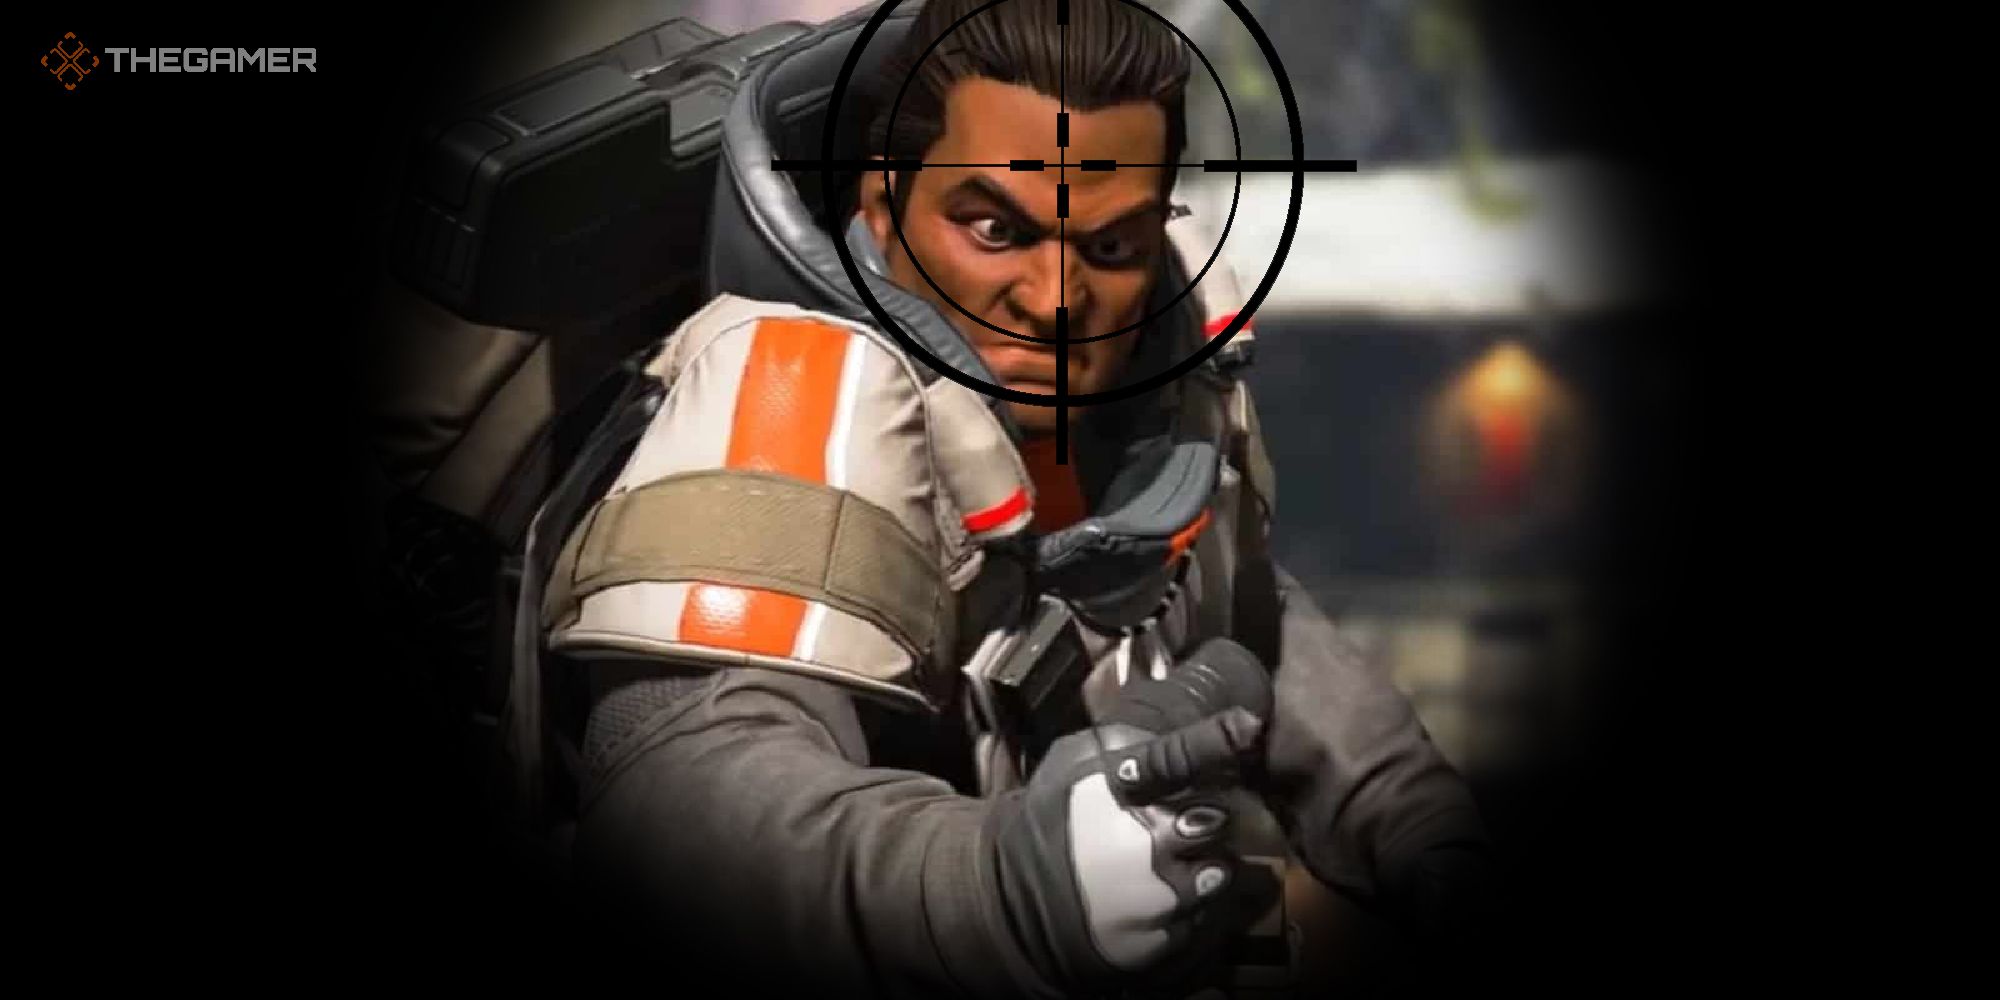 Gibralta pulls a strange face while being aimed at in Apex Legends